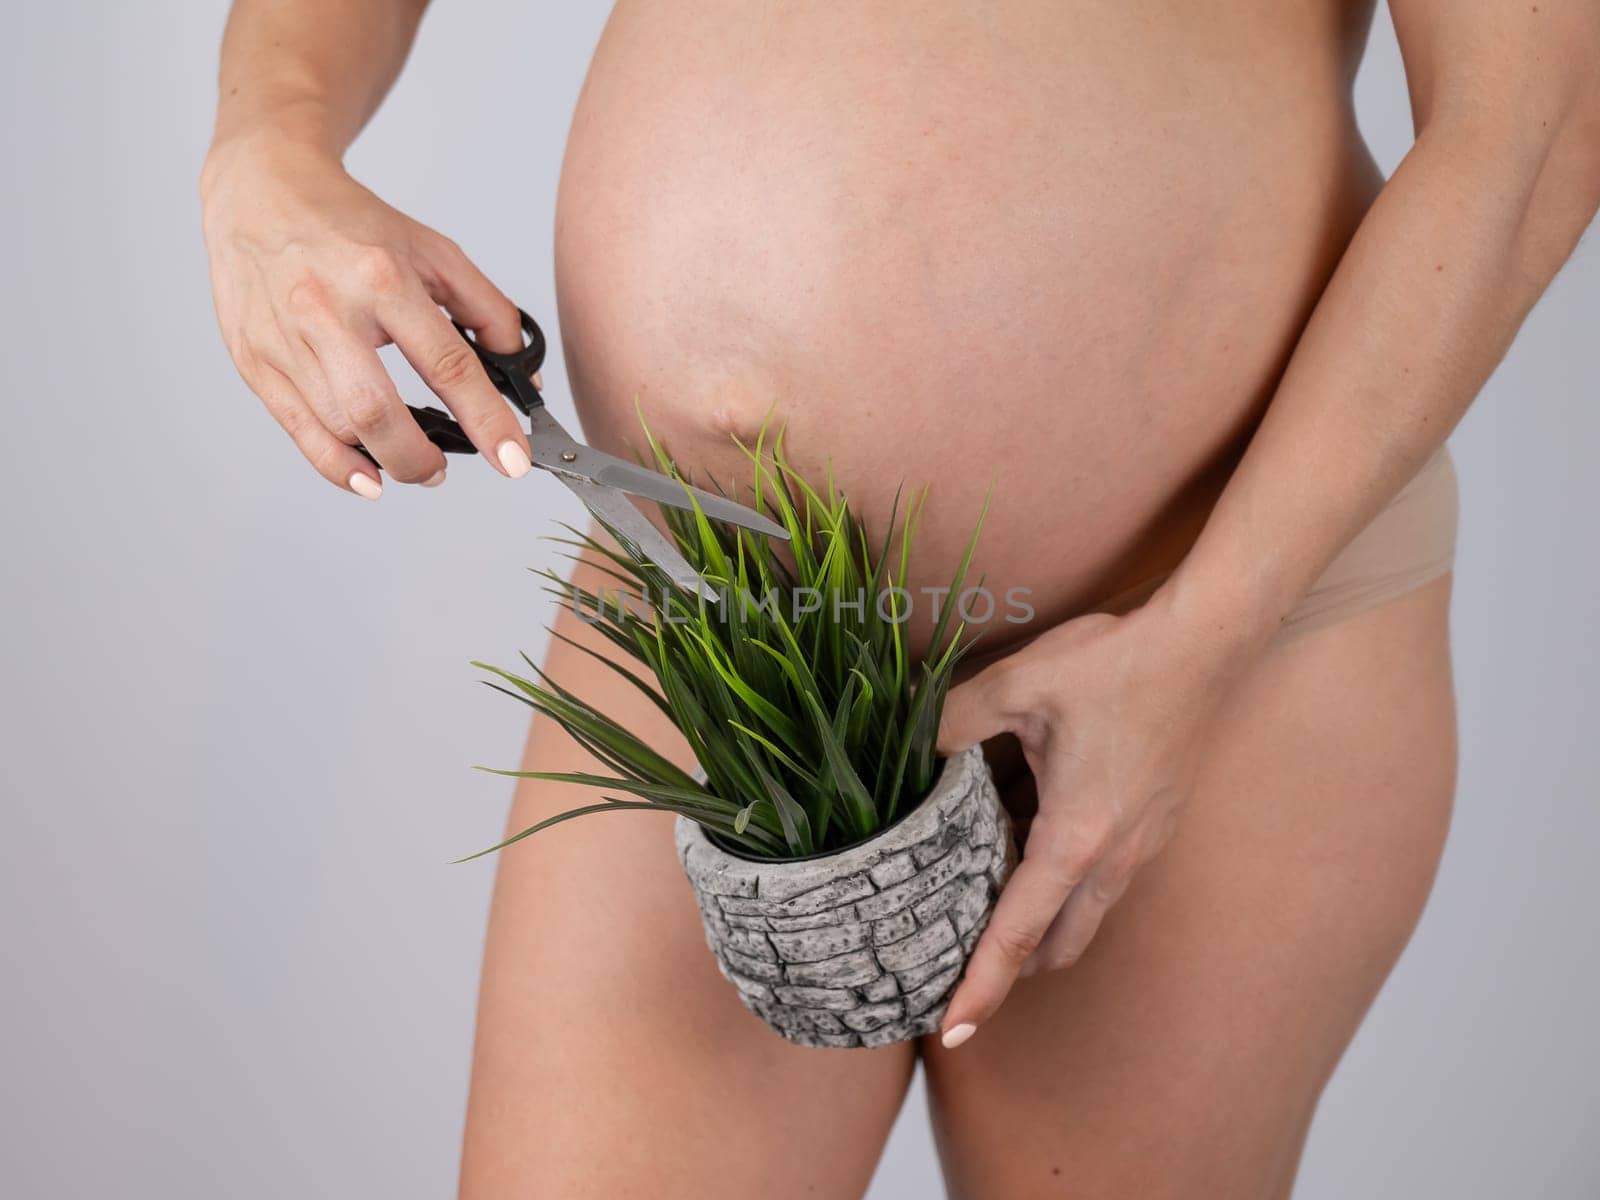 A faceless pregnant woman cuts a plant with scissors. Metaphor for epilation of the bikini area. by mrwed54